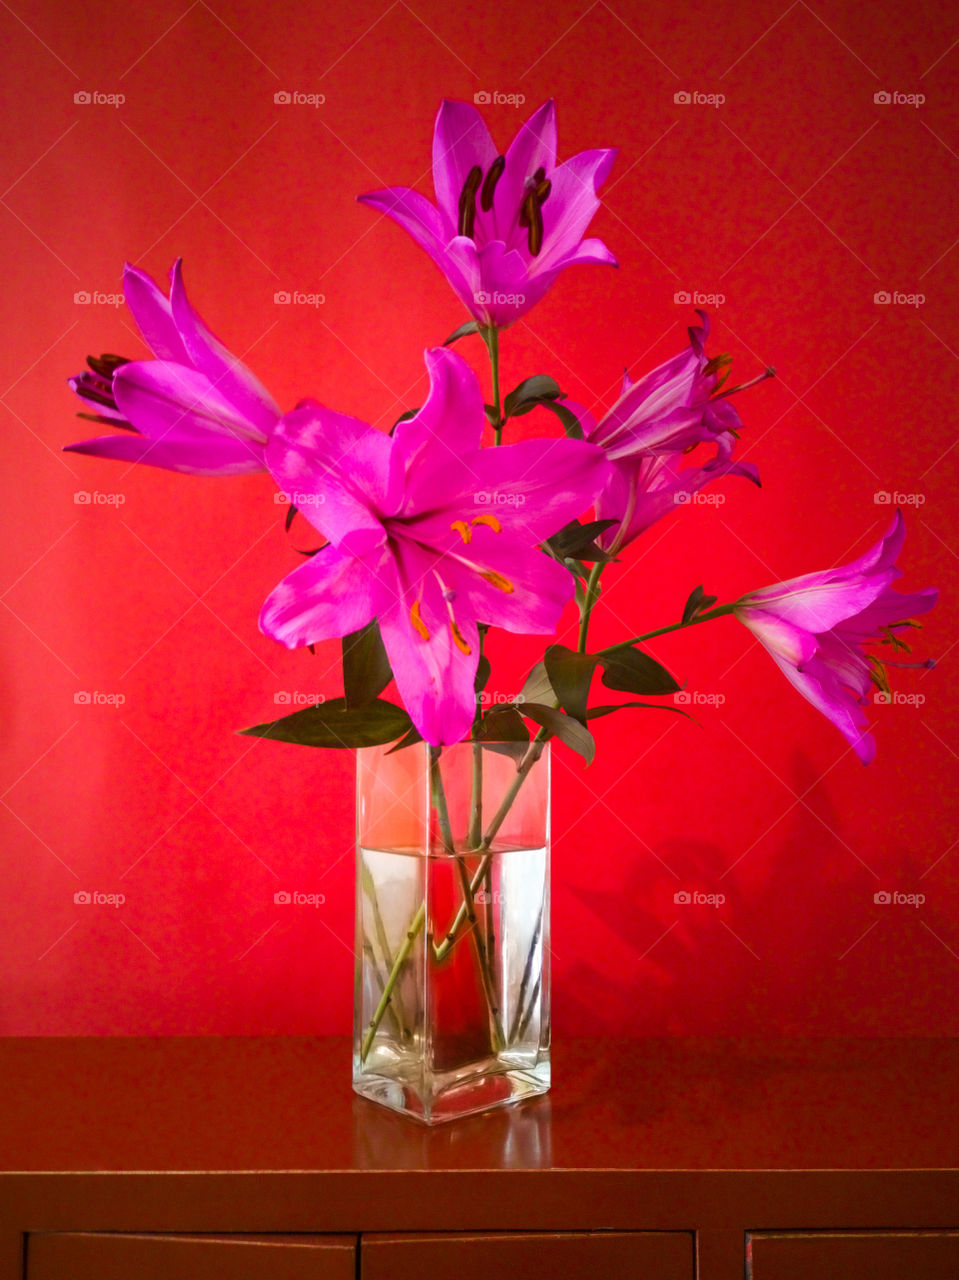 Purple Lilies flowers in glass square vase on red background.